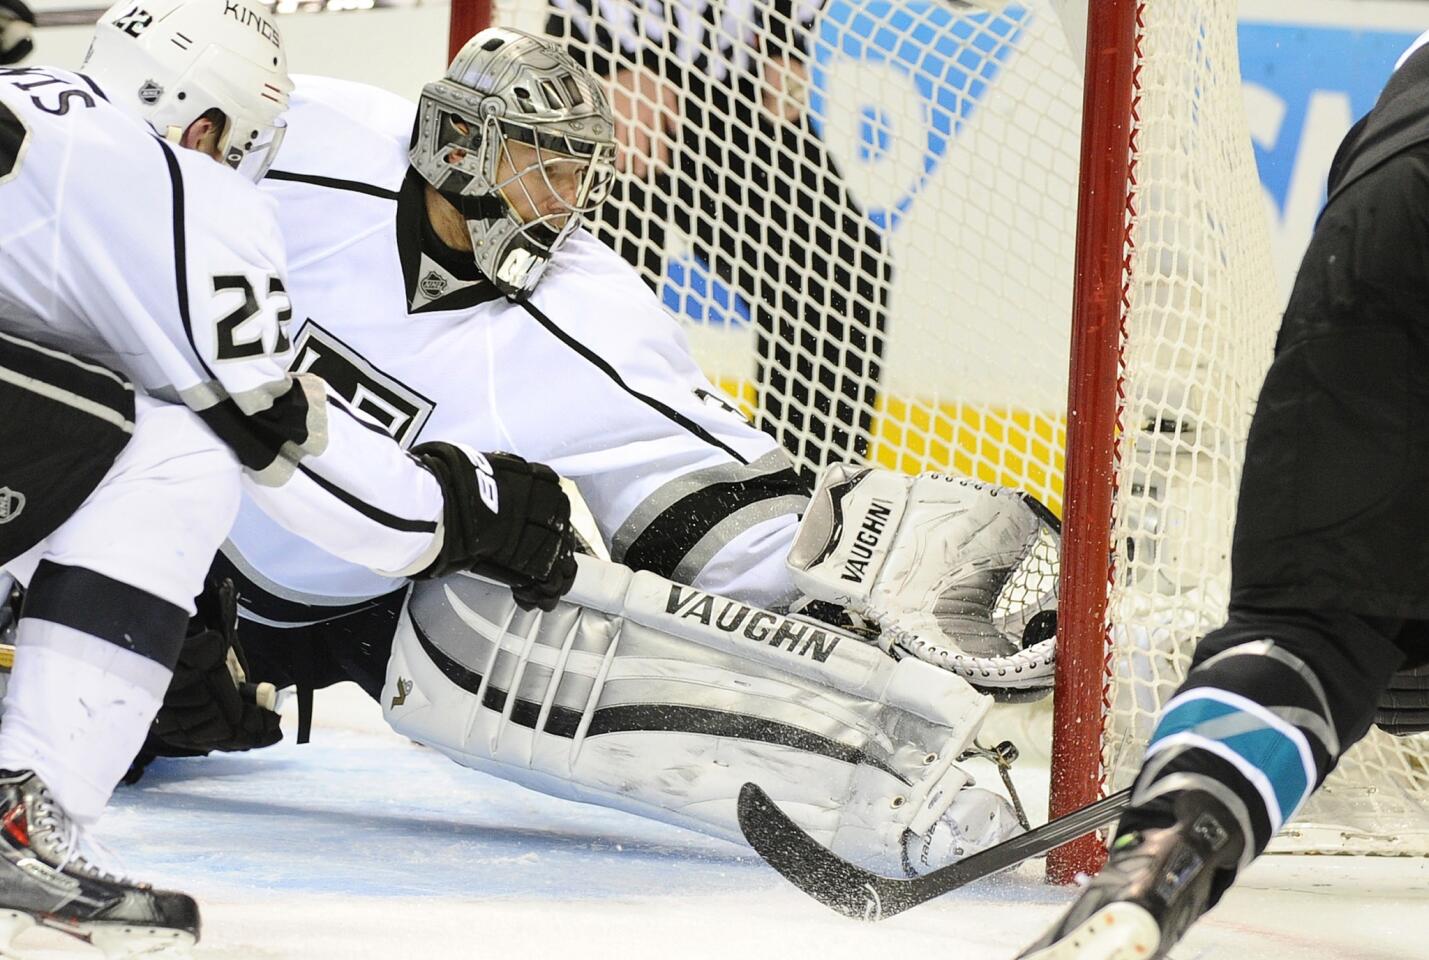 Kings goalie Jonathan Quick makes a save on a shot by San Jose Sharks forward Patrick Marleau during the second period of Game 7 of the Western Conference quarterfinals. The shot was reviewed and was ruled no goal.